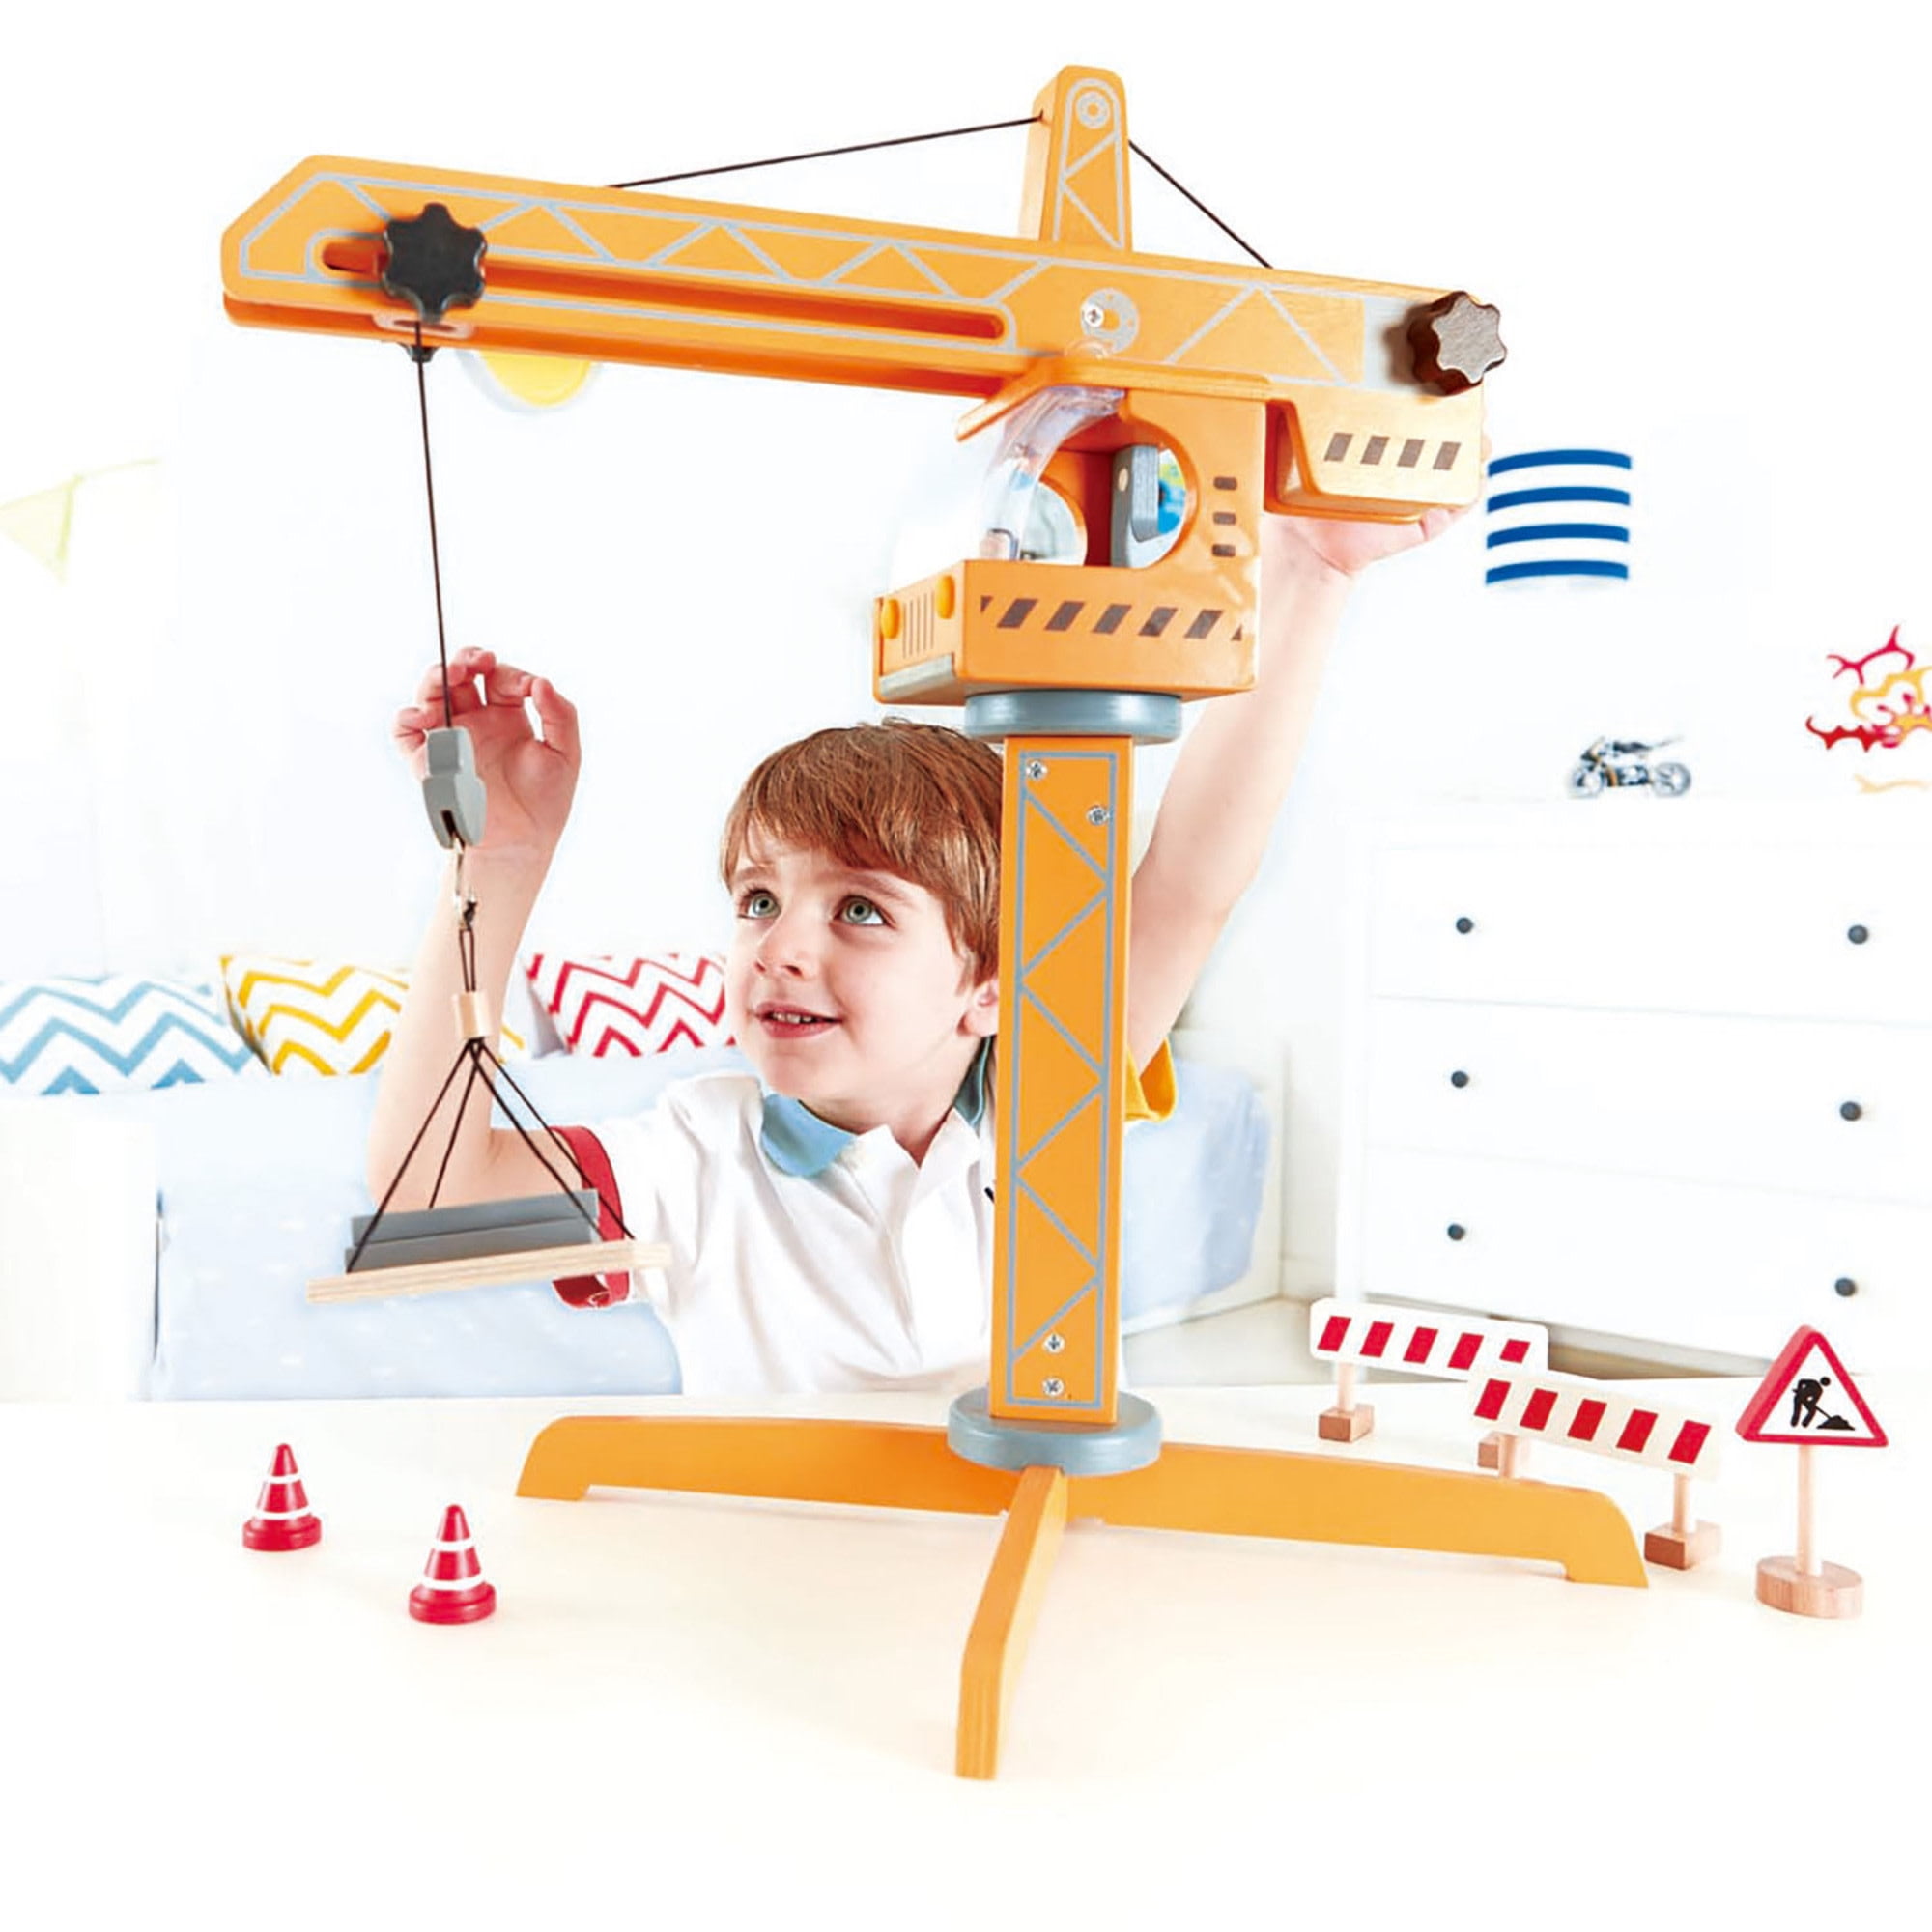  Hape Crane and Cargo Train Set  Wooden Railway Toy Set with  Magnetic Crane, Button Operated Loader and Adjustable Rail Signal  Multicolor, 19.69 Large x 19.69 W x 15.16 H ,count